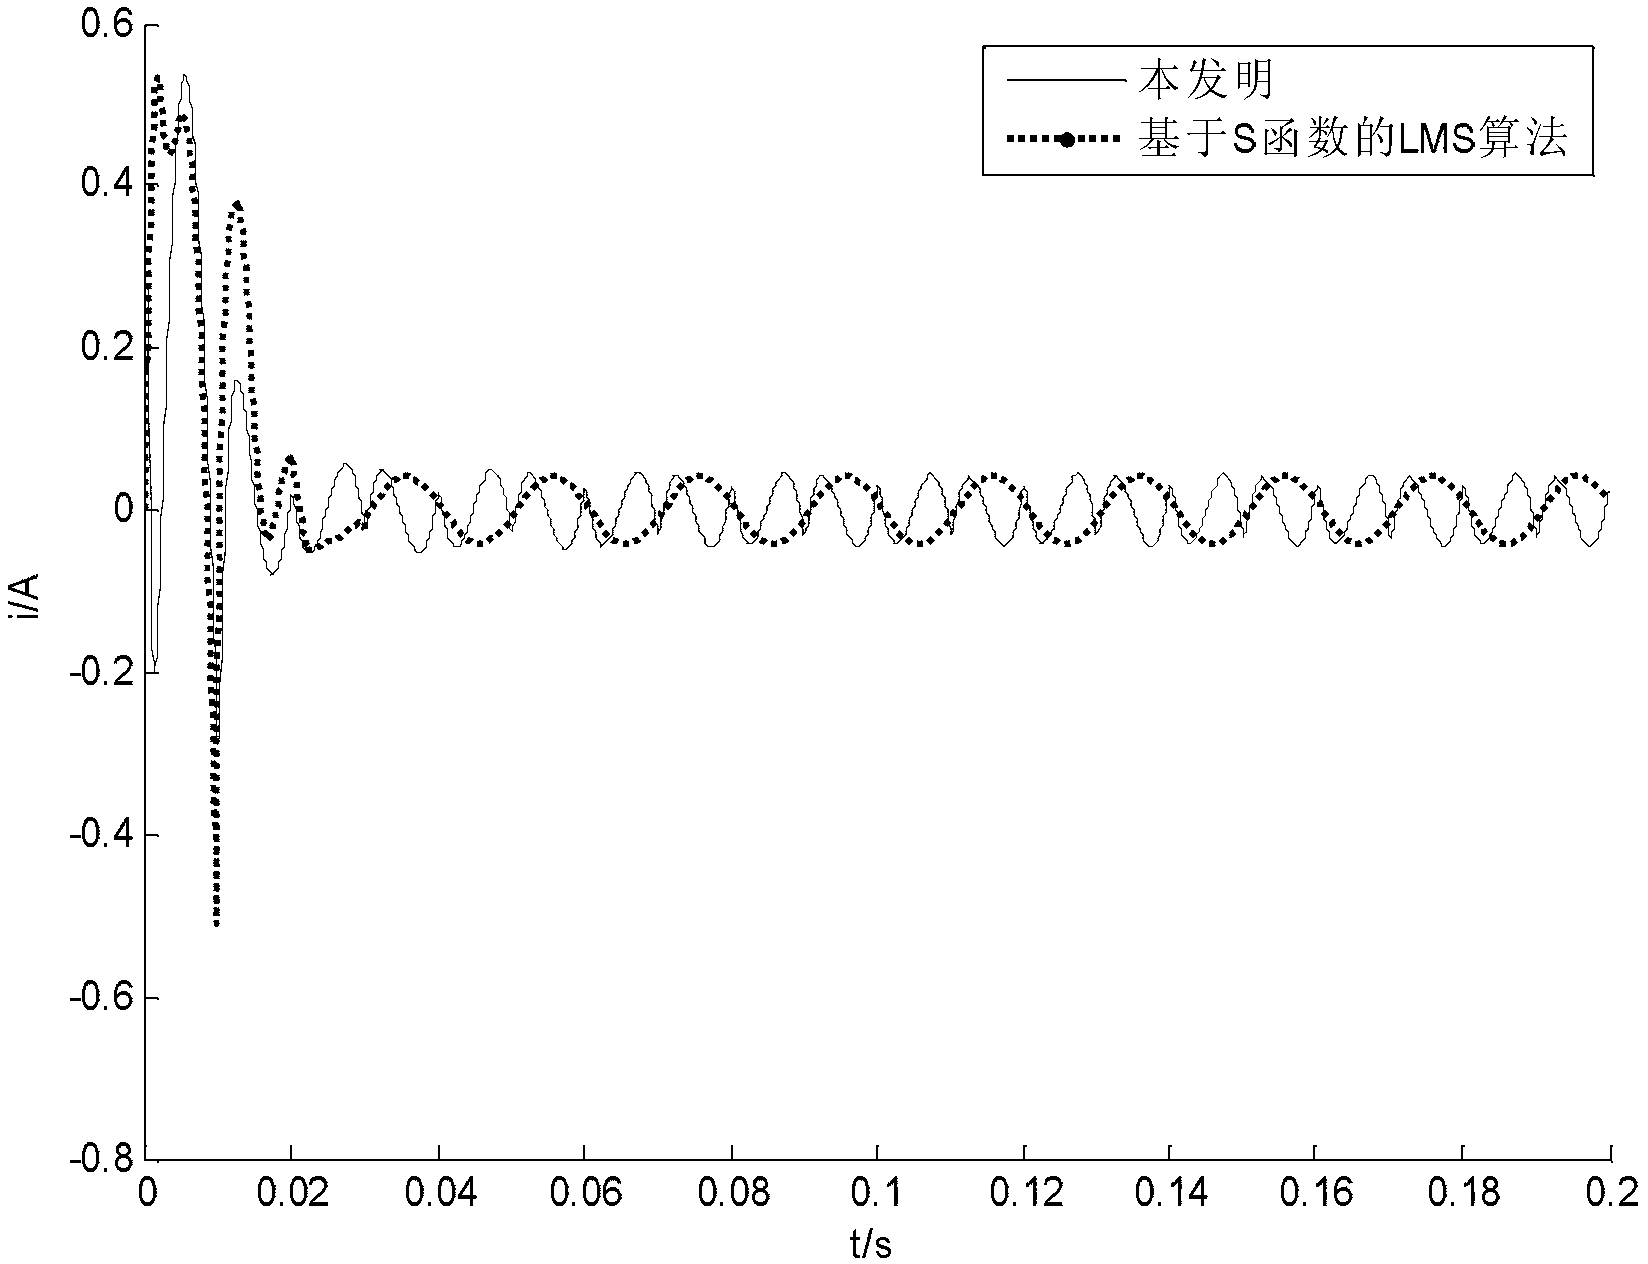 Variable step size affine projection harmonic current detection method based on time coherent average